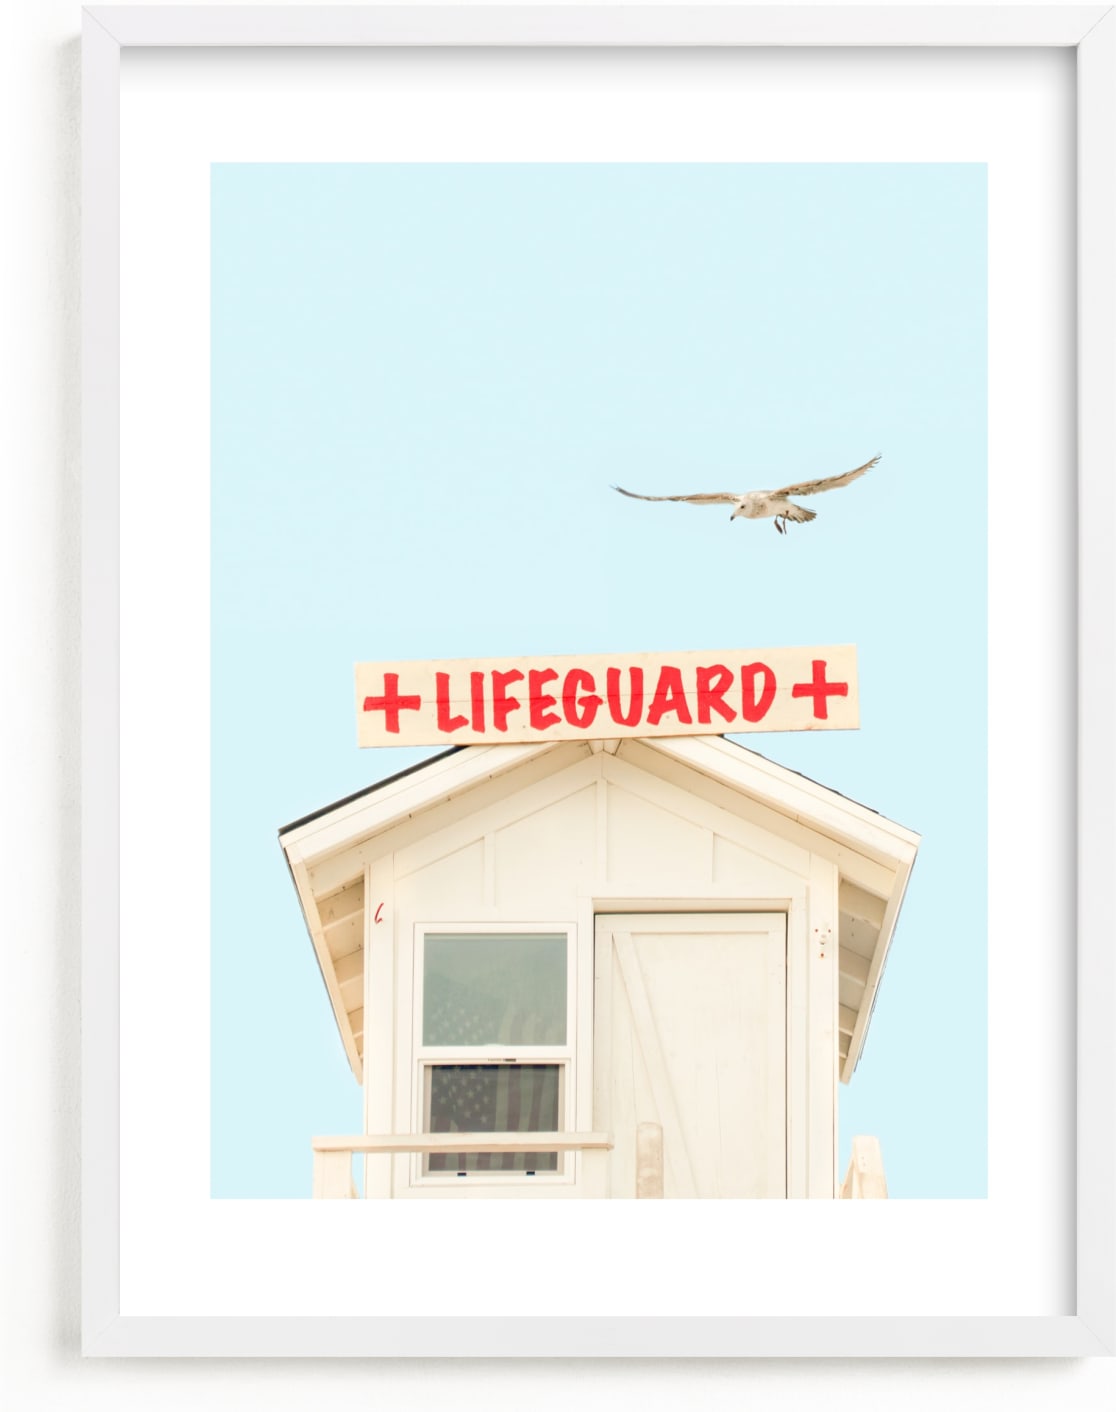 This is a blue kids wall art by Lisa Sundin called The Lifeguard.